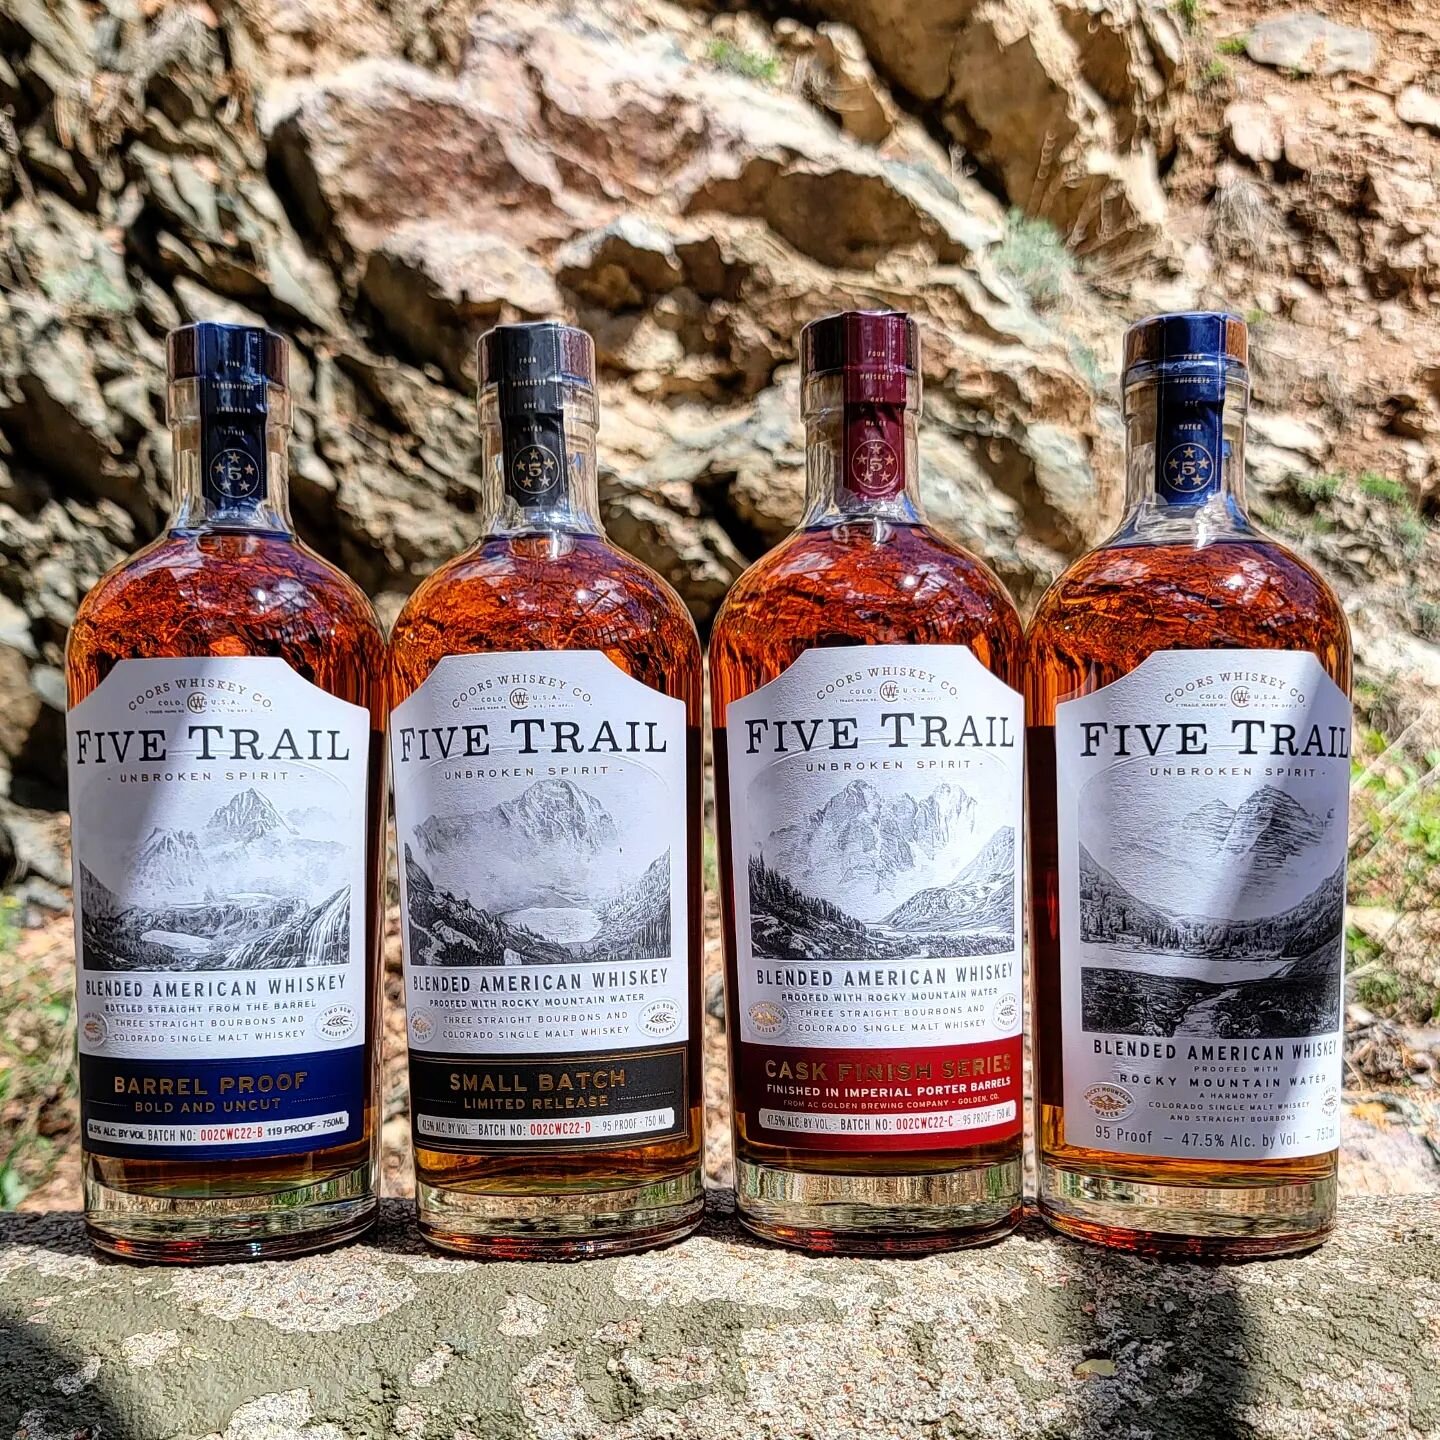 Spirit Spotlight- Five Trail Whiskey 🥃
___________________________

When you think of Coors, chances are you think of Banquet or Light, not a whiskey. But Five Trail is anything but a whiskey. 

Creating a variety containing three straight bourbons 